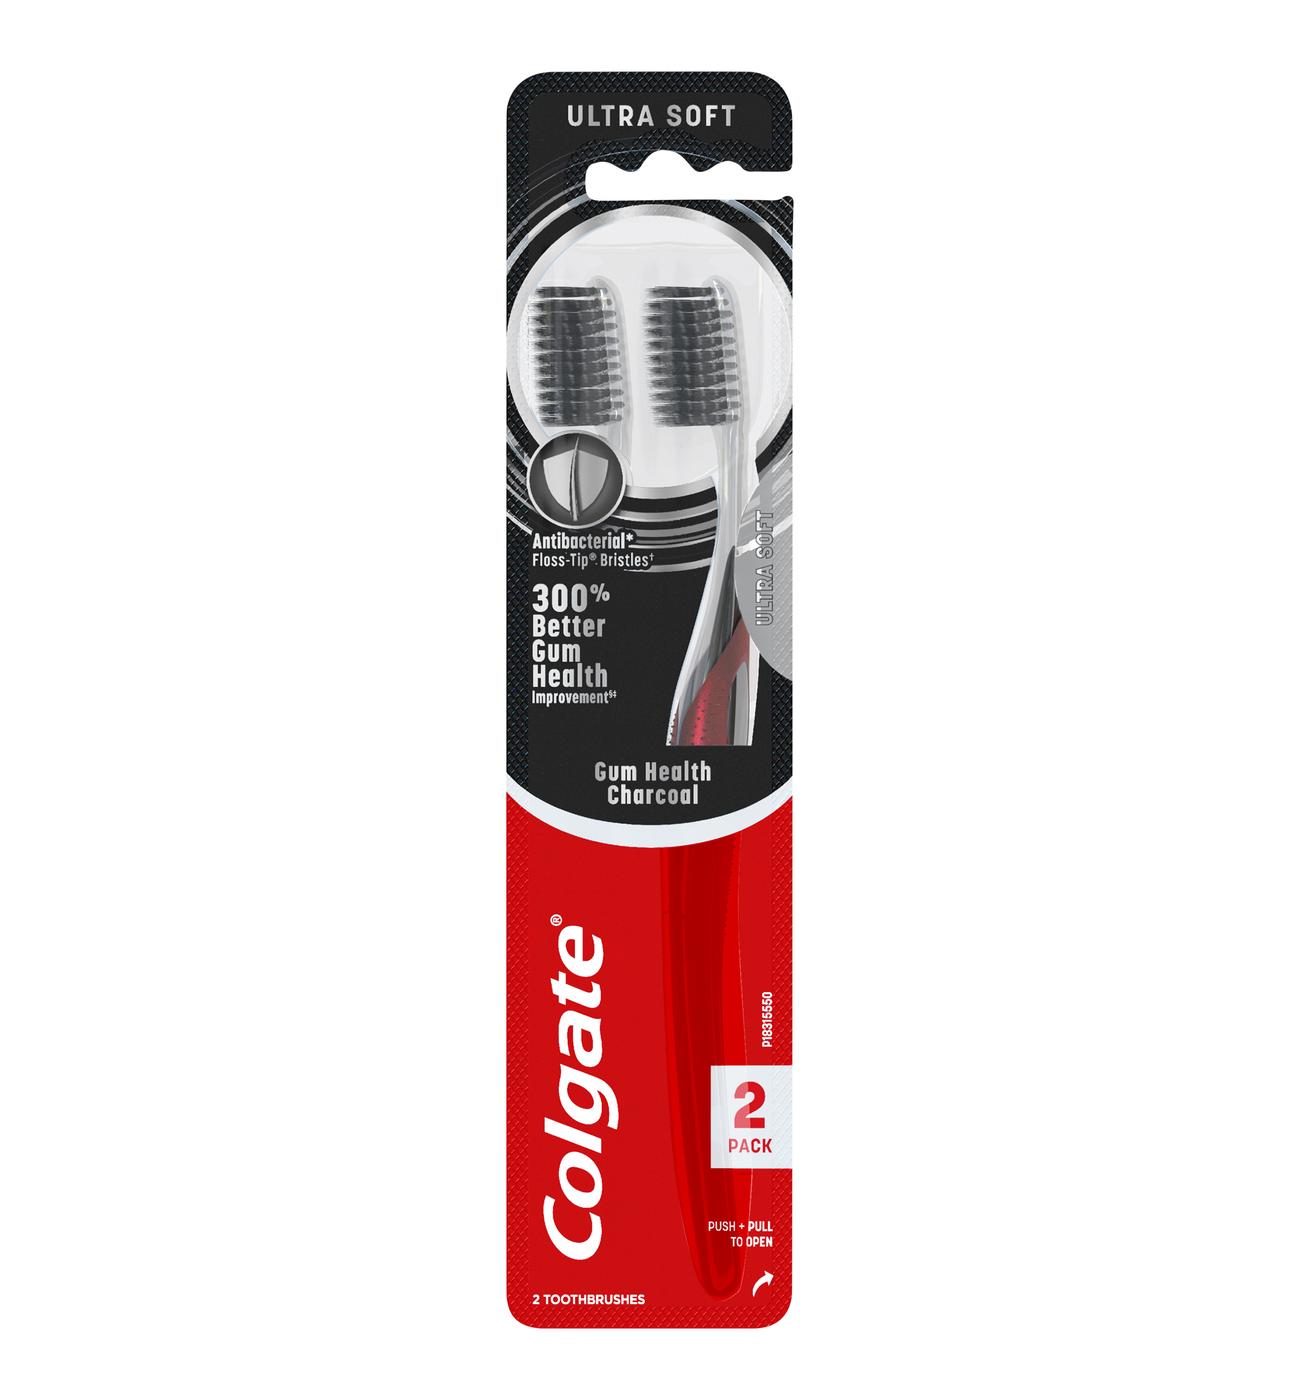 Colgate Gum Health Charcoal Toothbrushes - Ultra Soft; image 1 of 4